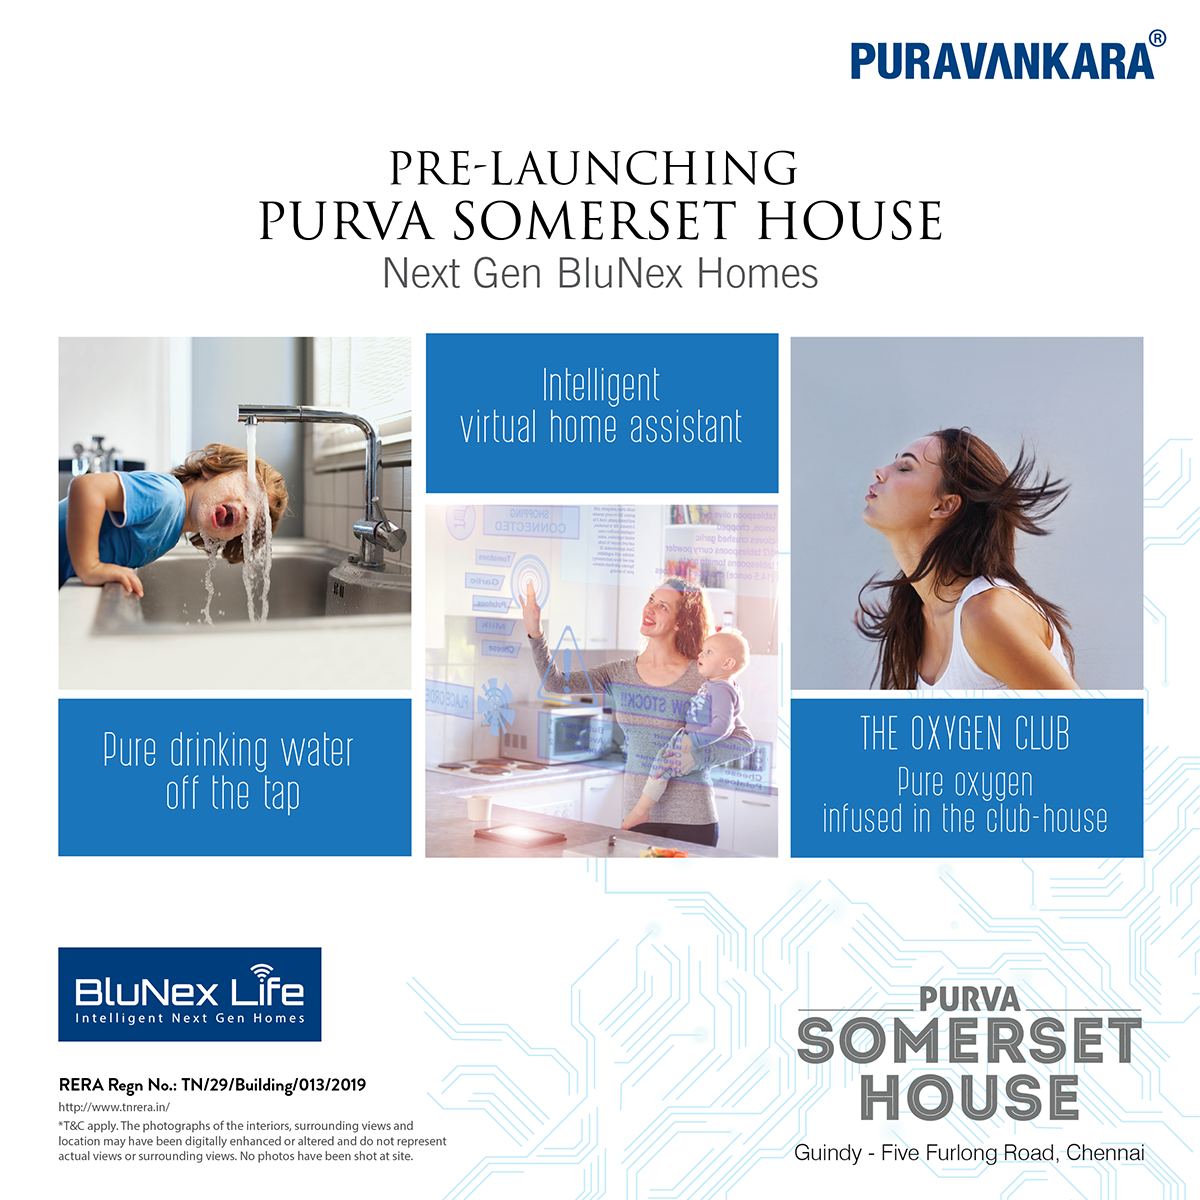 Pre-launching Purva Somerset House in Guindy, Chennai Update